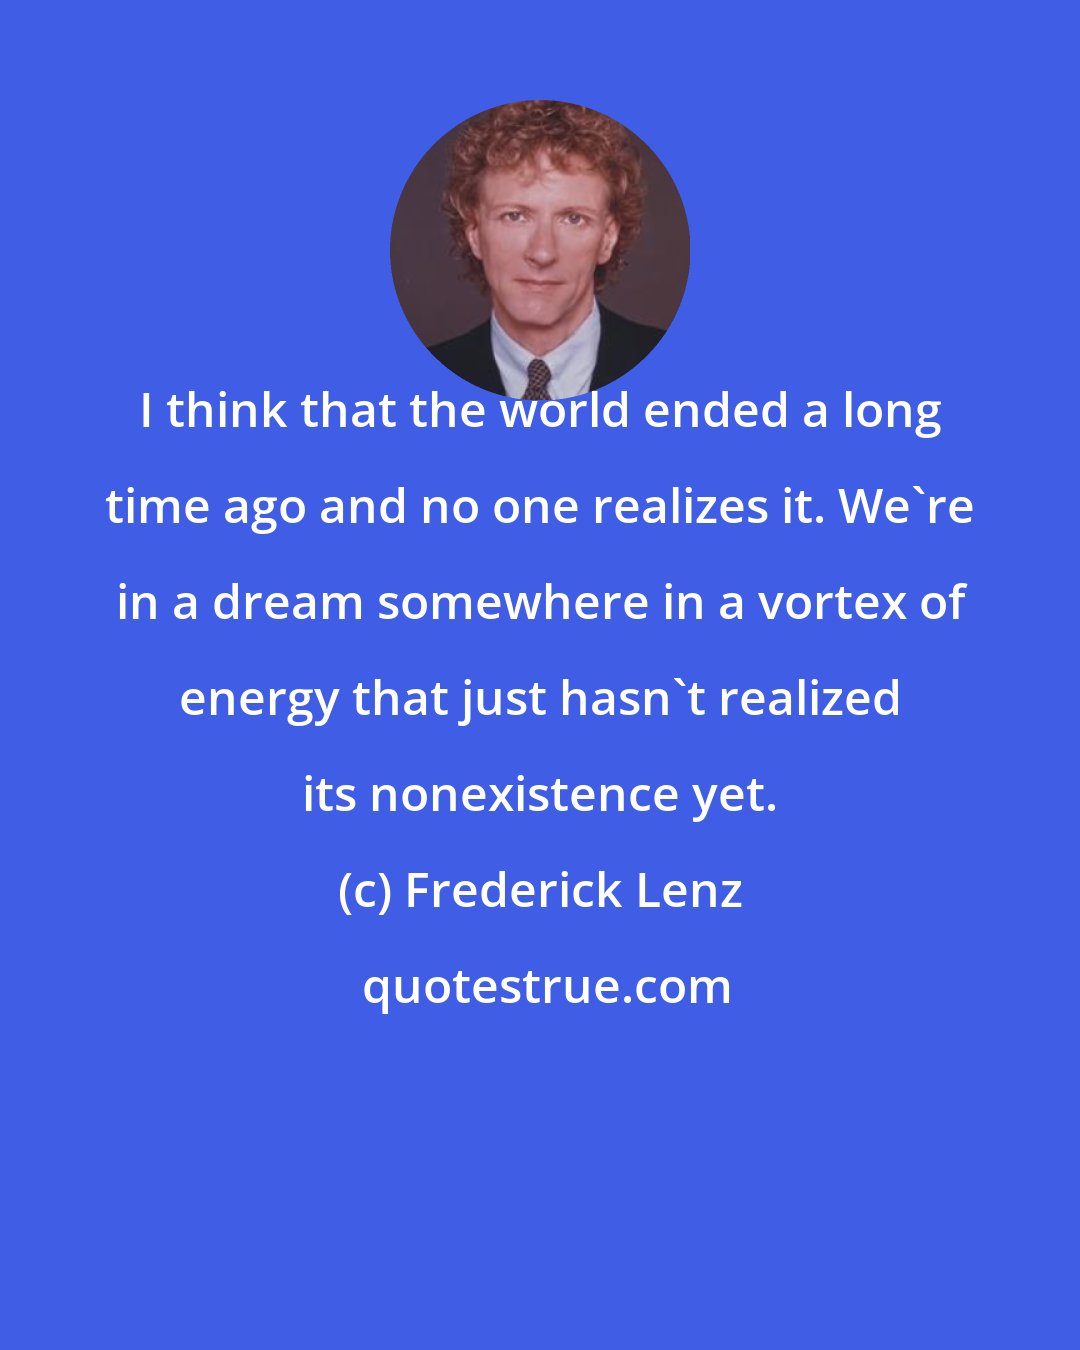 Frederick Lenz: I think that the world ended a long time ago and no one realizes it. We're in a dream somewhere in a vortex of energy that just hasn't realized its nonexistence yet.